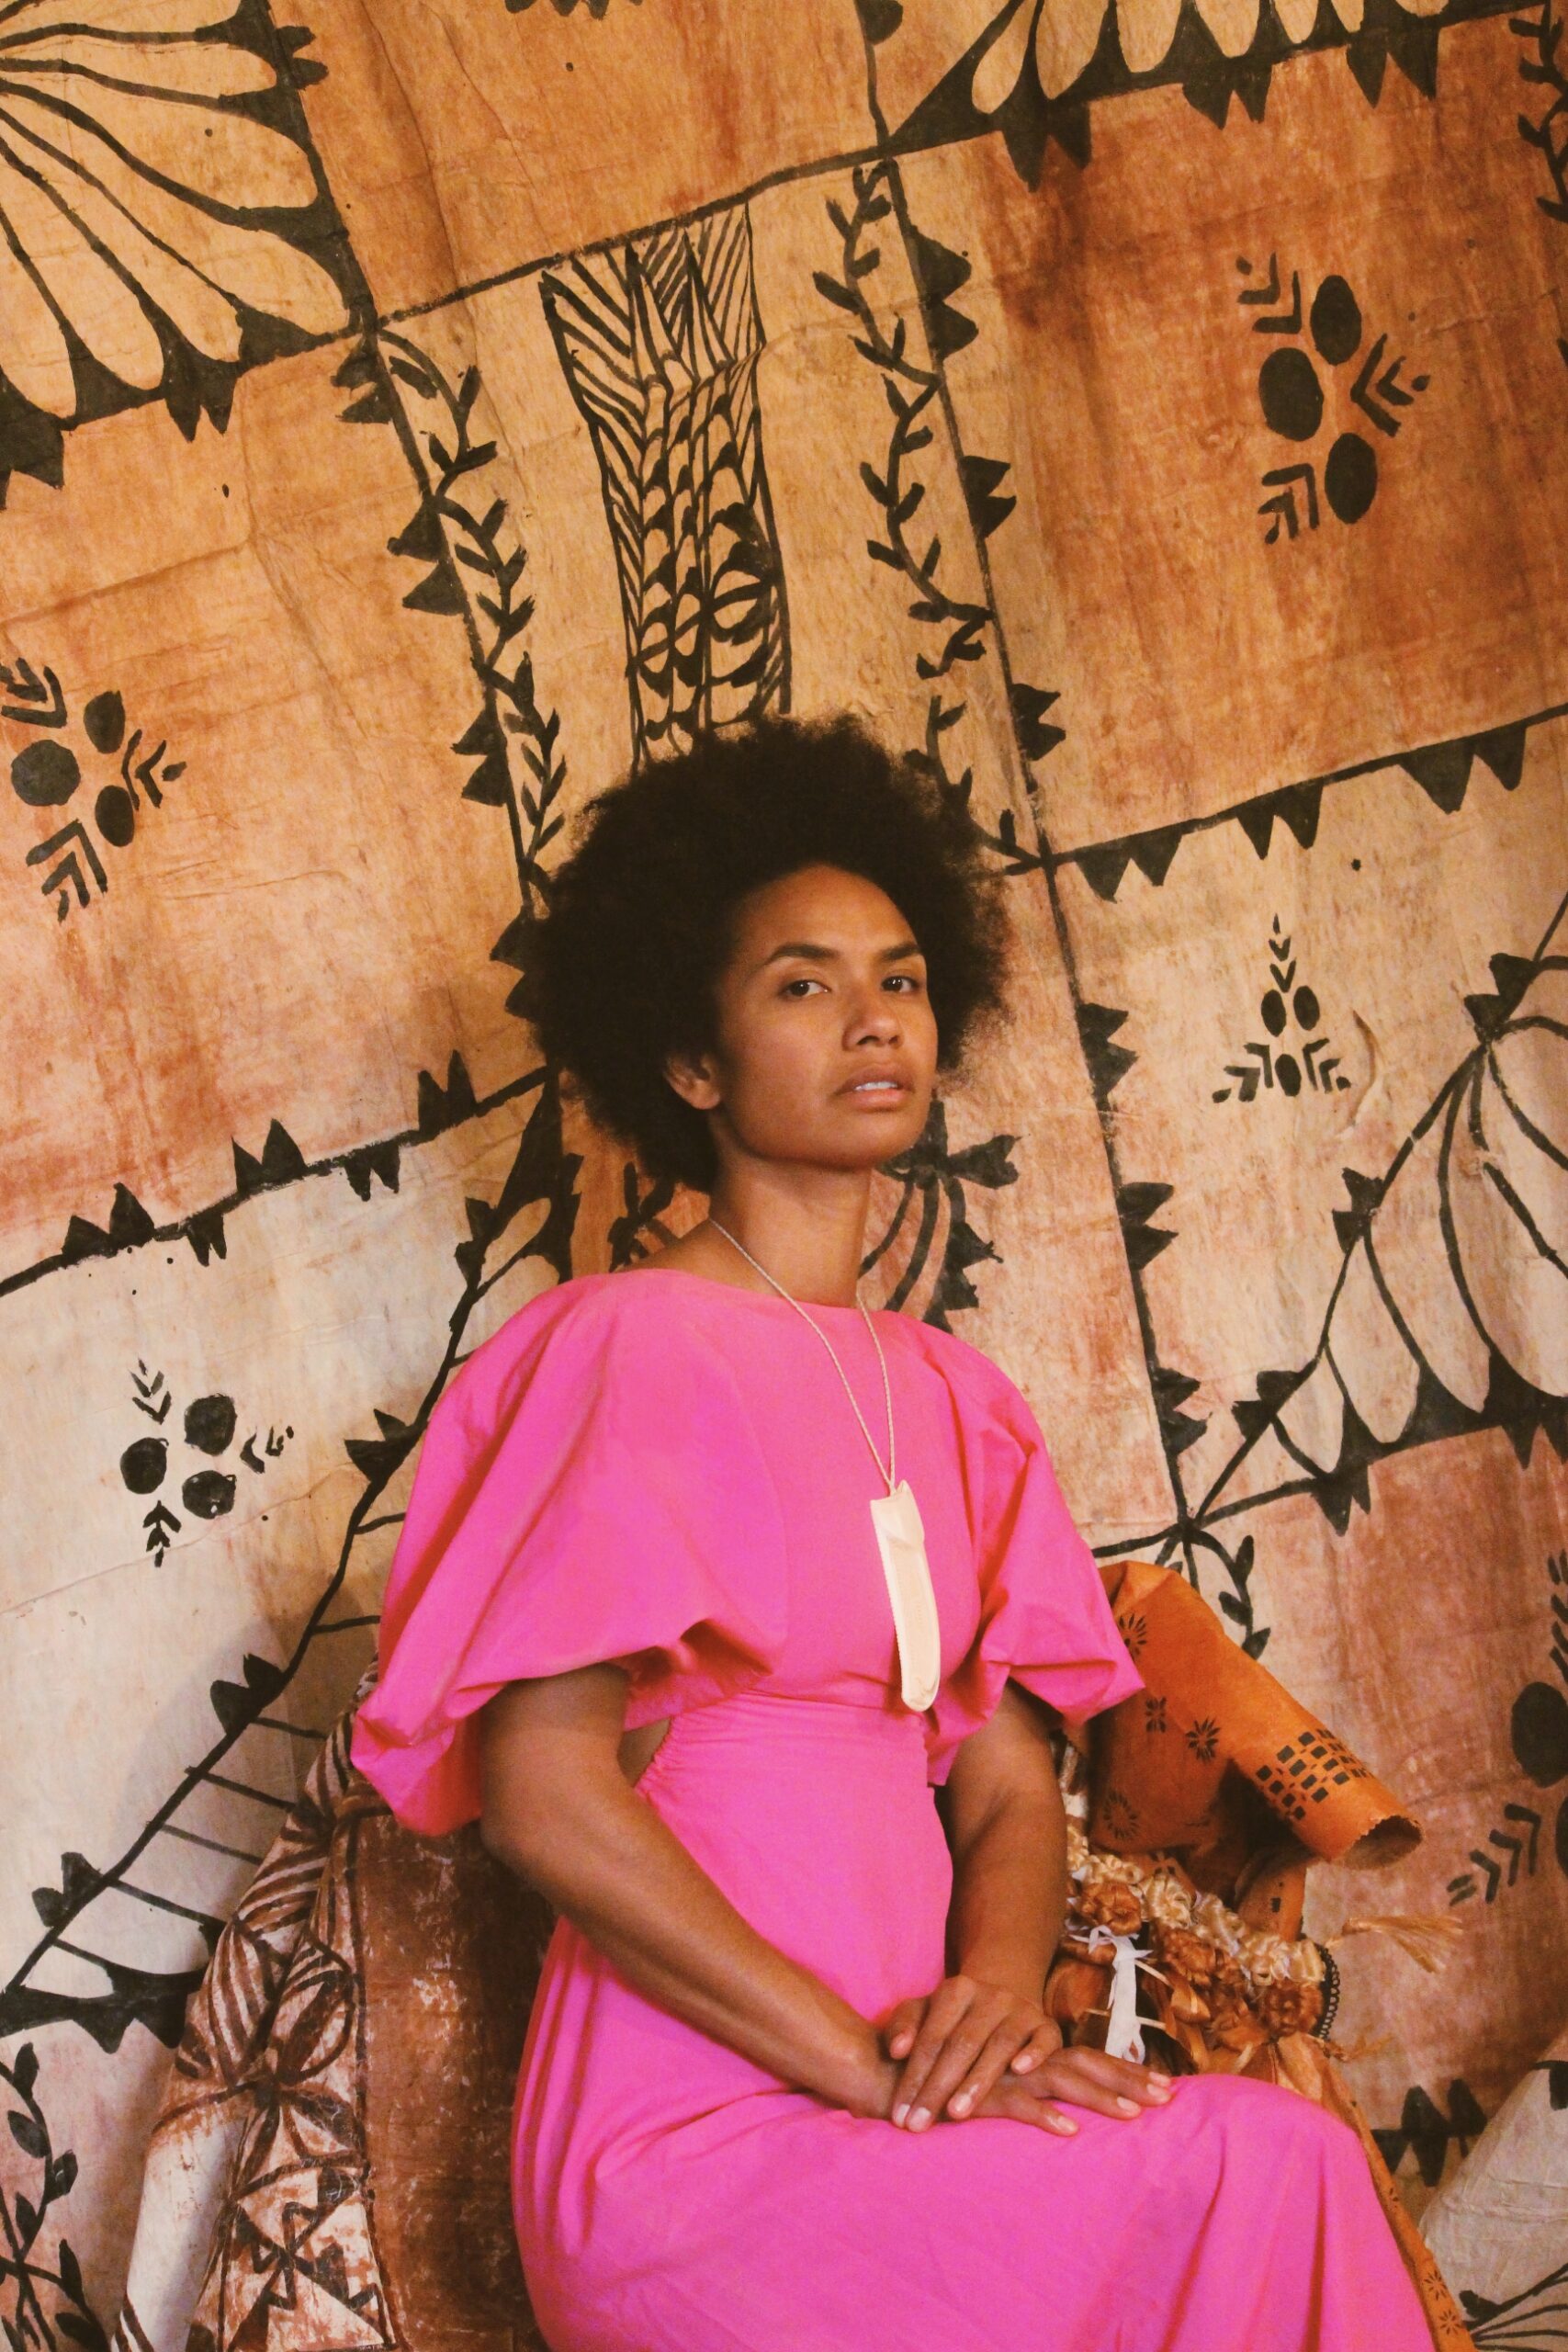 A portrait of an Itaukei woman in her late 20's with a jet black buiniga hairstyle. She is sitting upright on a chair in front of ngatu. She is wearing a pink dress with a necklace